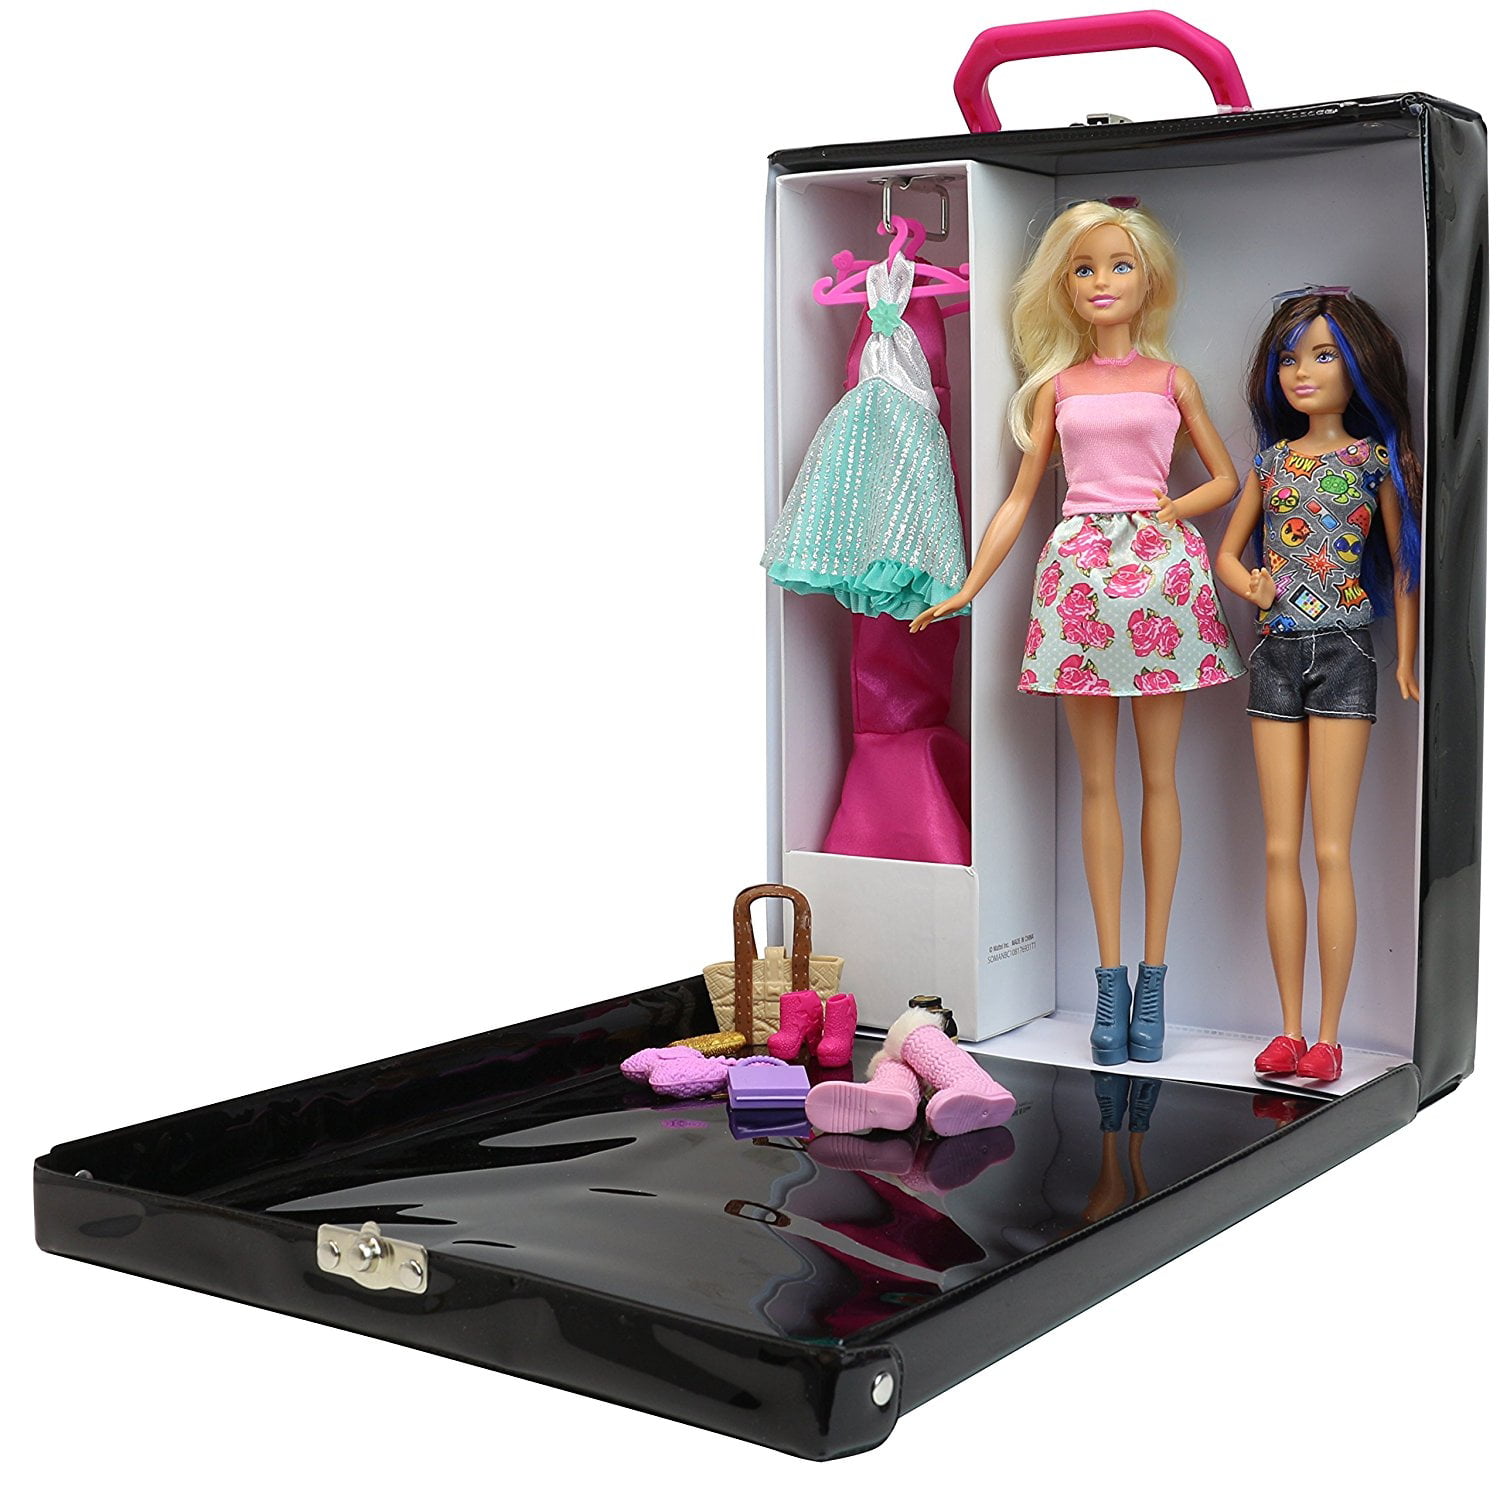 barbie on the go watercraft and kayak set